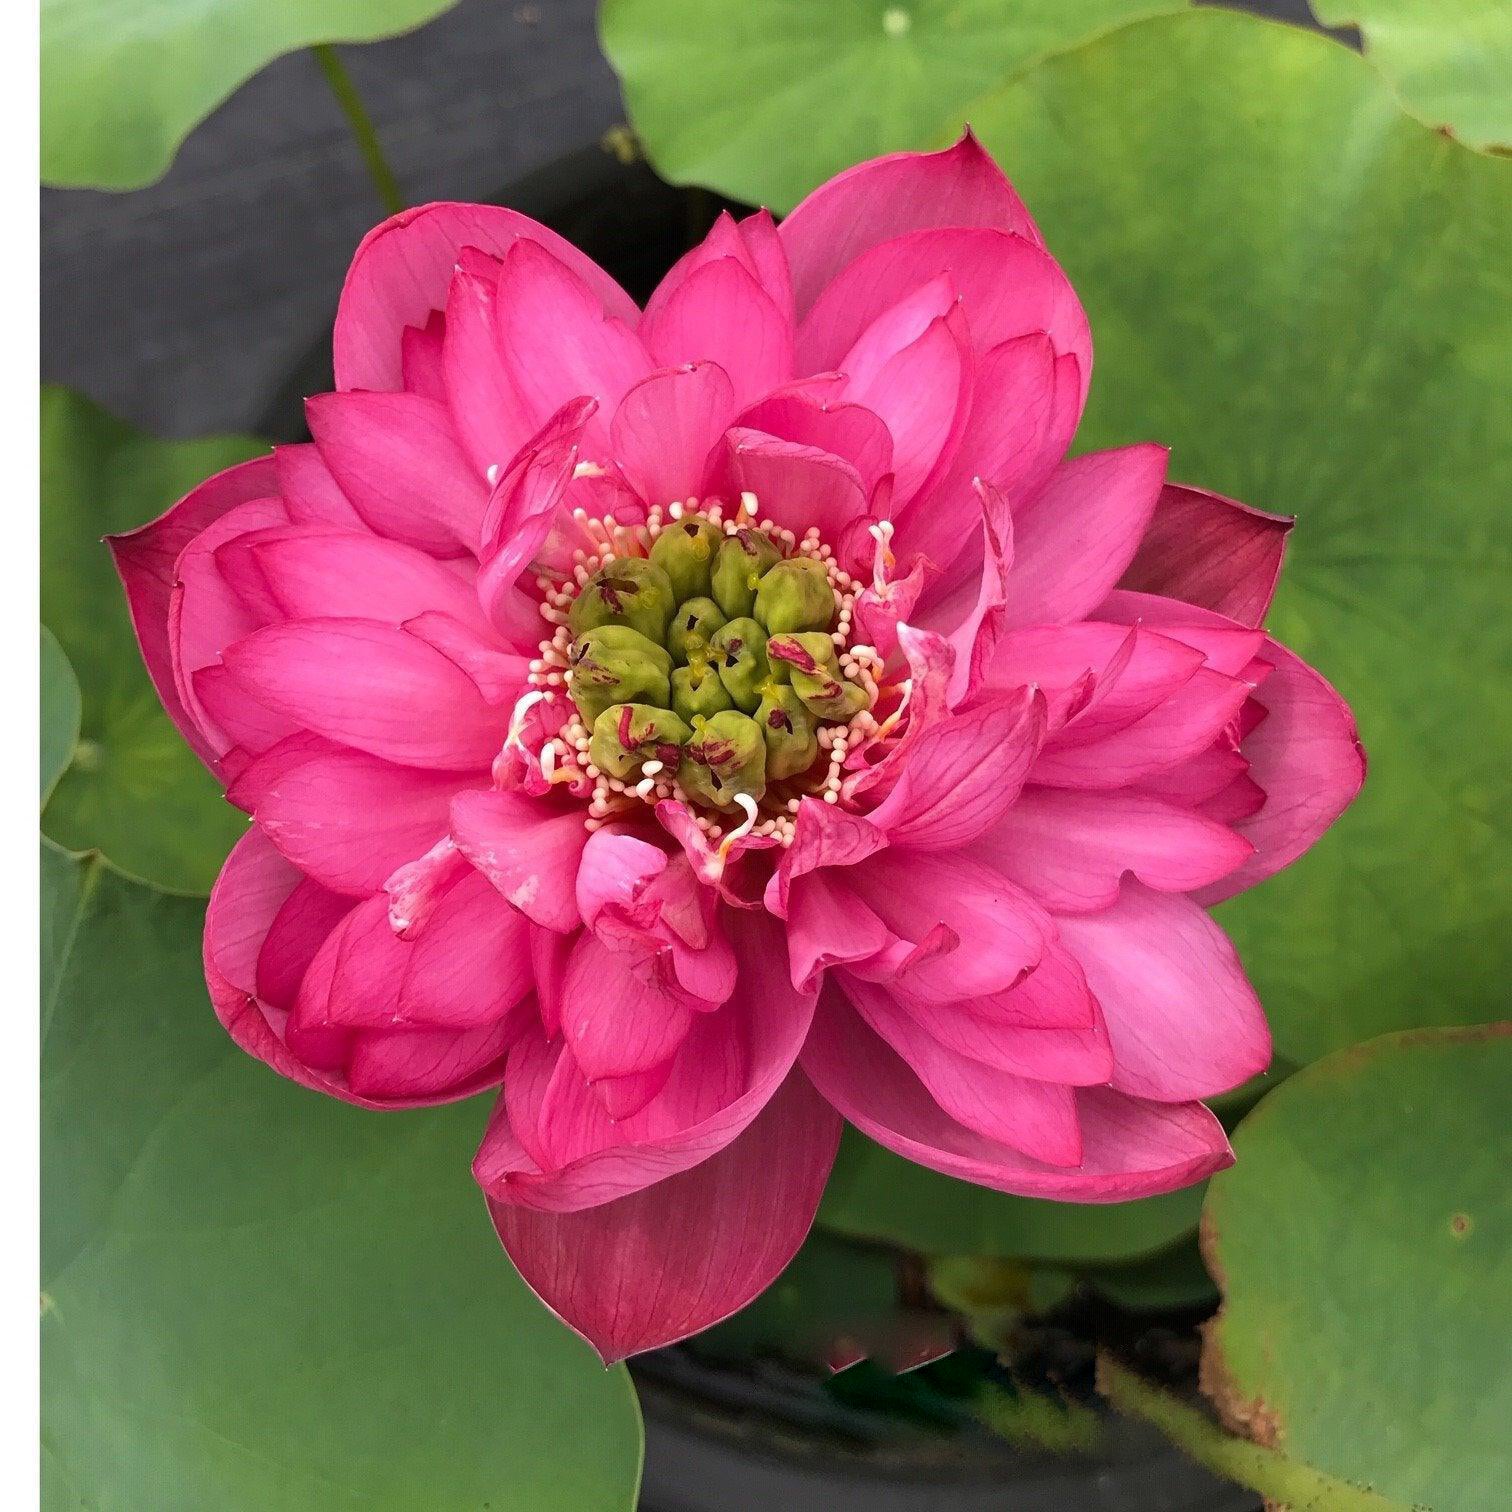 Jewel Flower - The Gem of the Garden Lotus (Bare Root) - Play It Koi